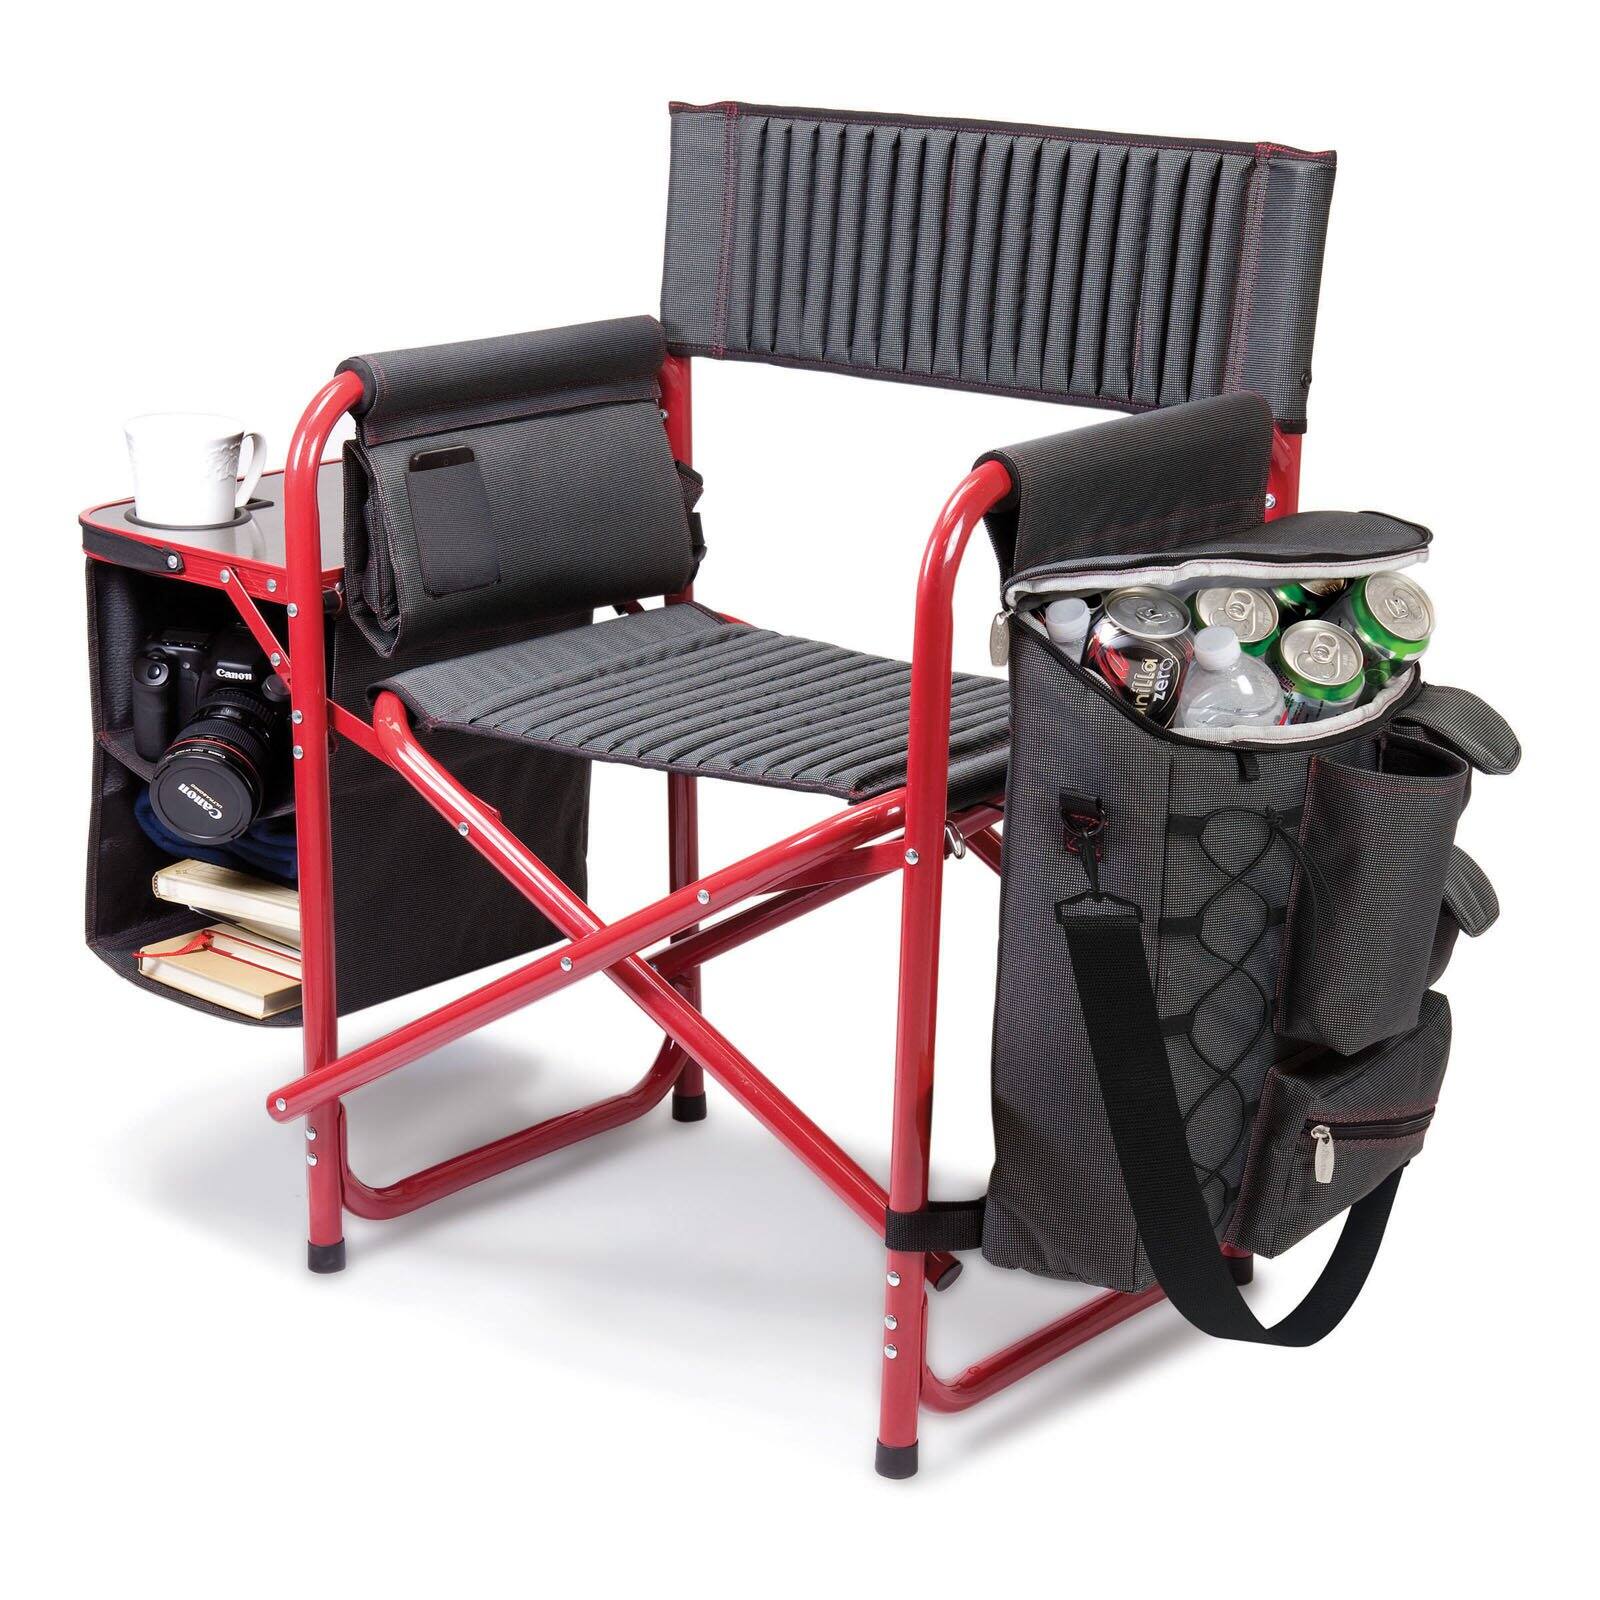 Picnic Time Fusion Directors Chair - Dark Gray with Red - image 1 of 4